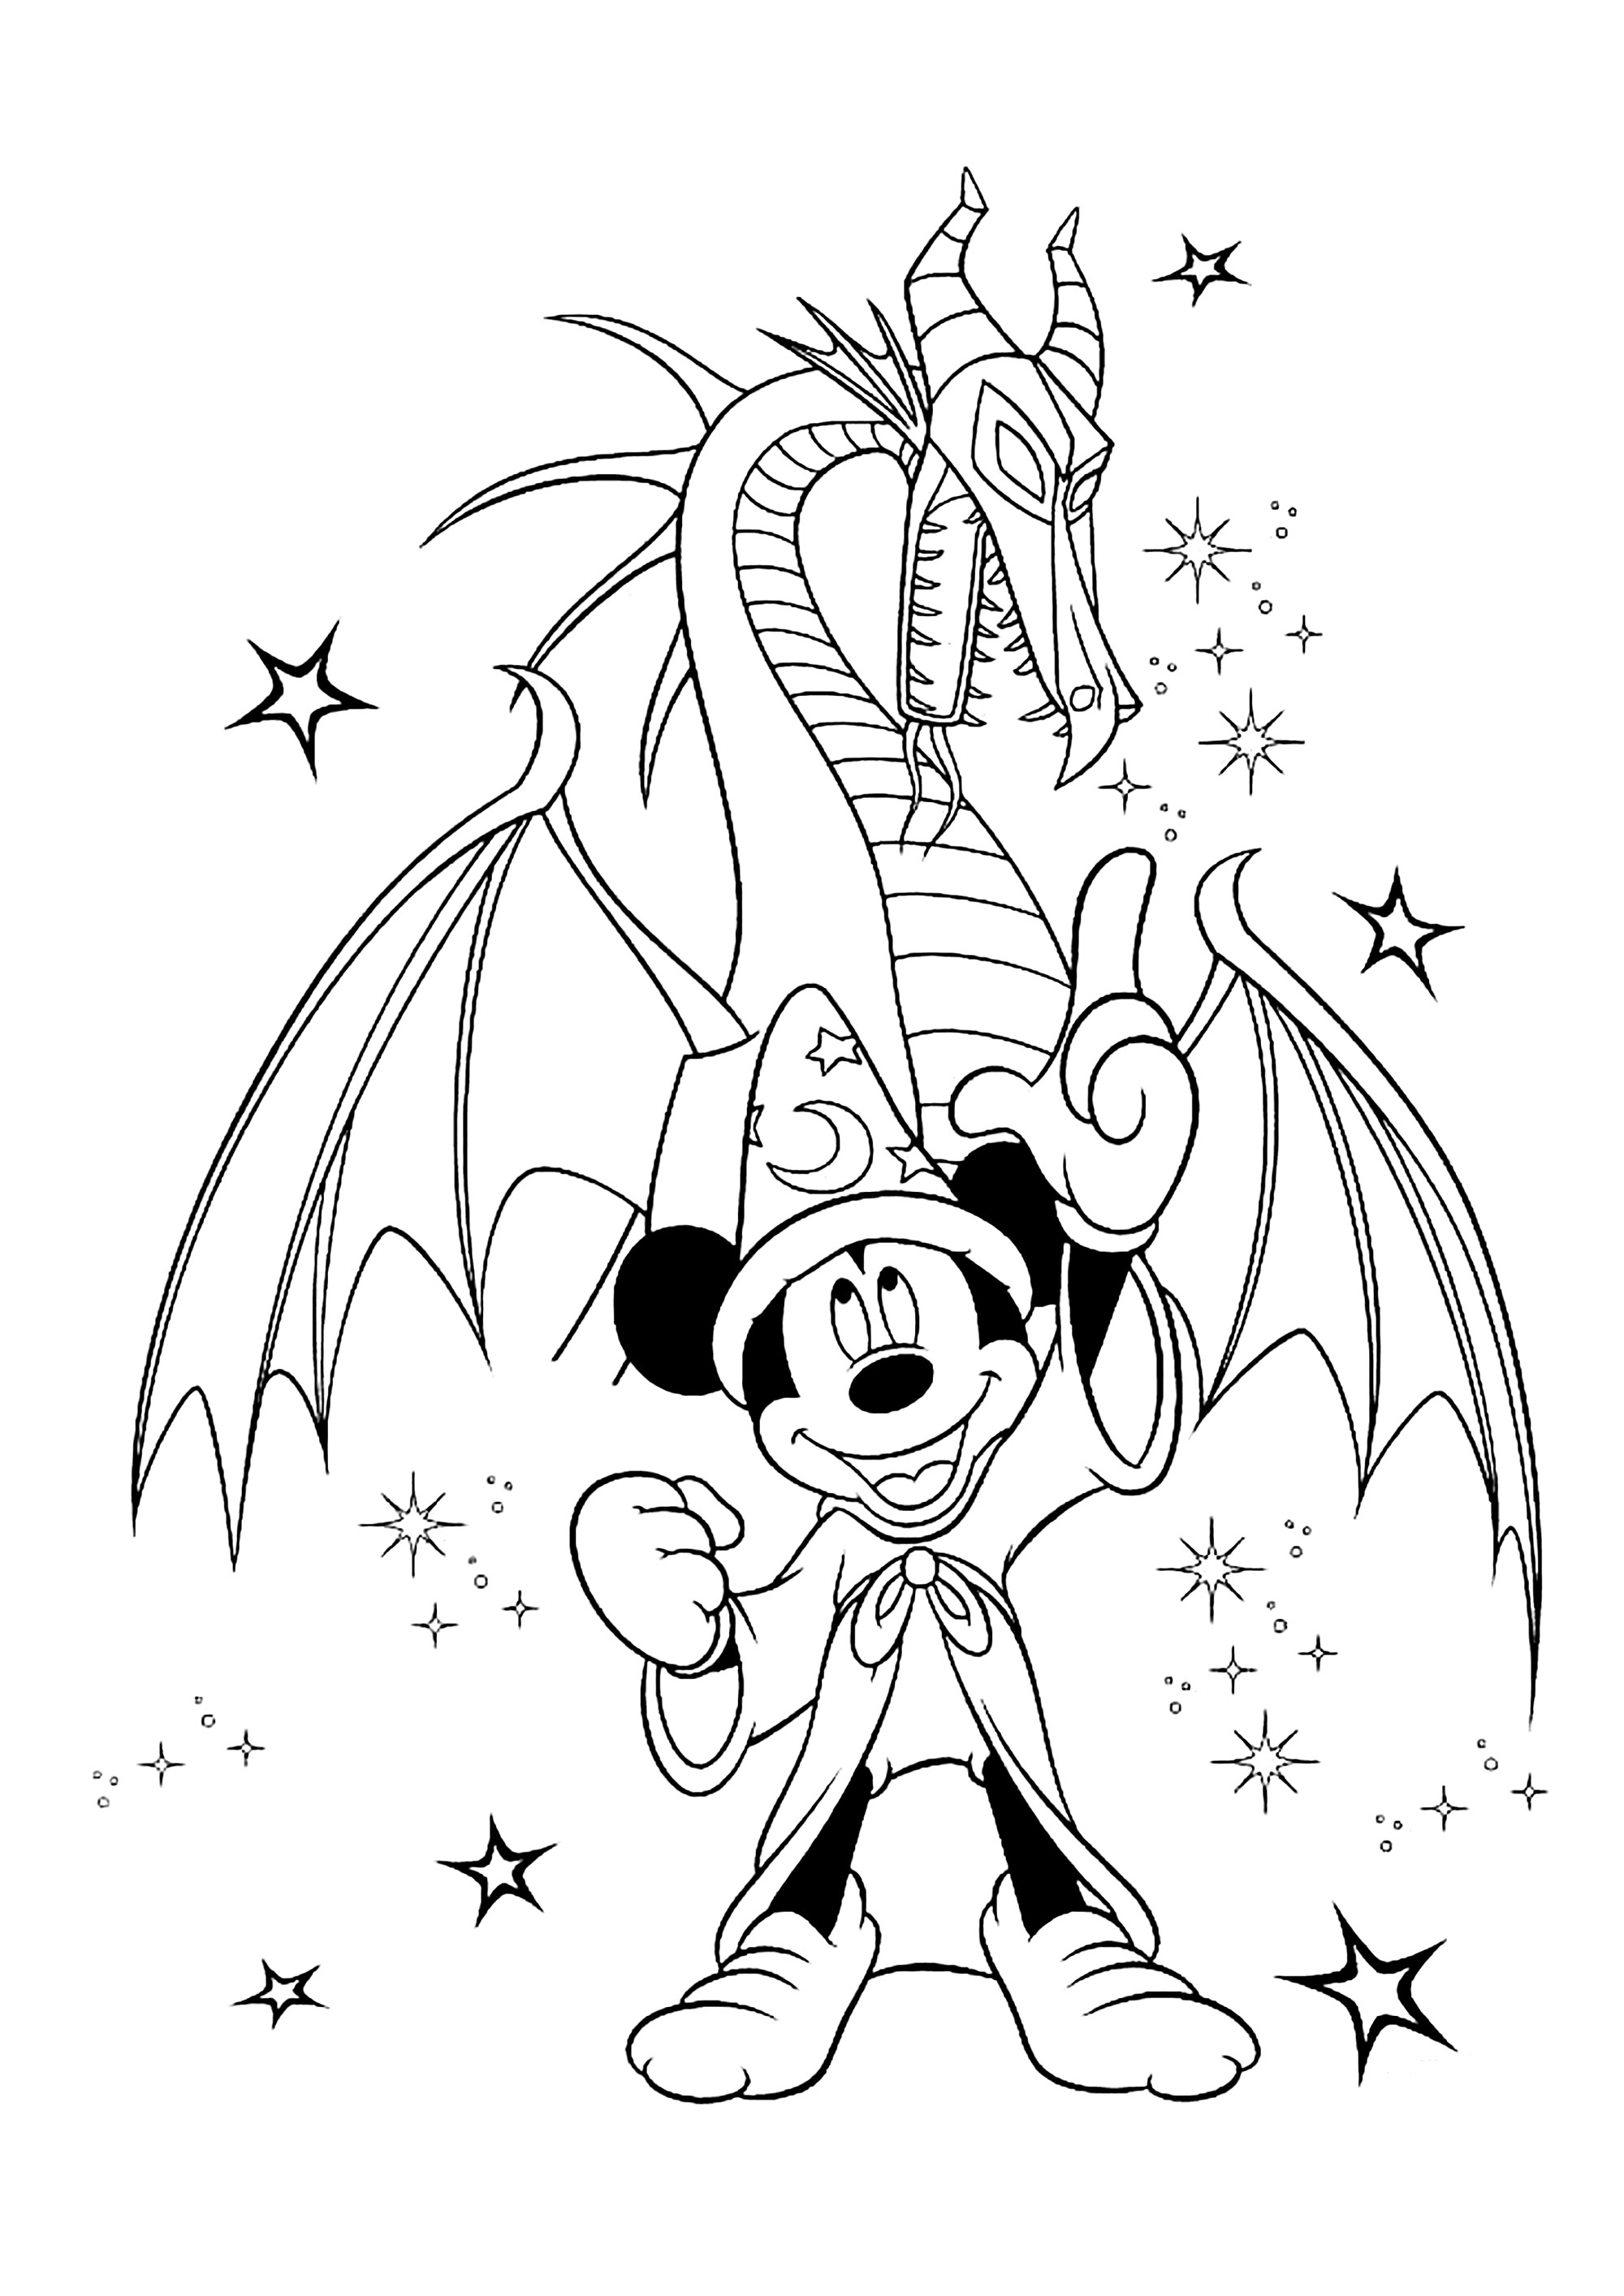 Fantasia coloring pages: Mickey and the dragon